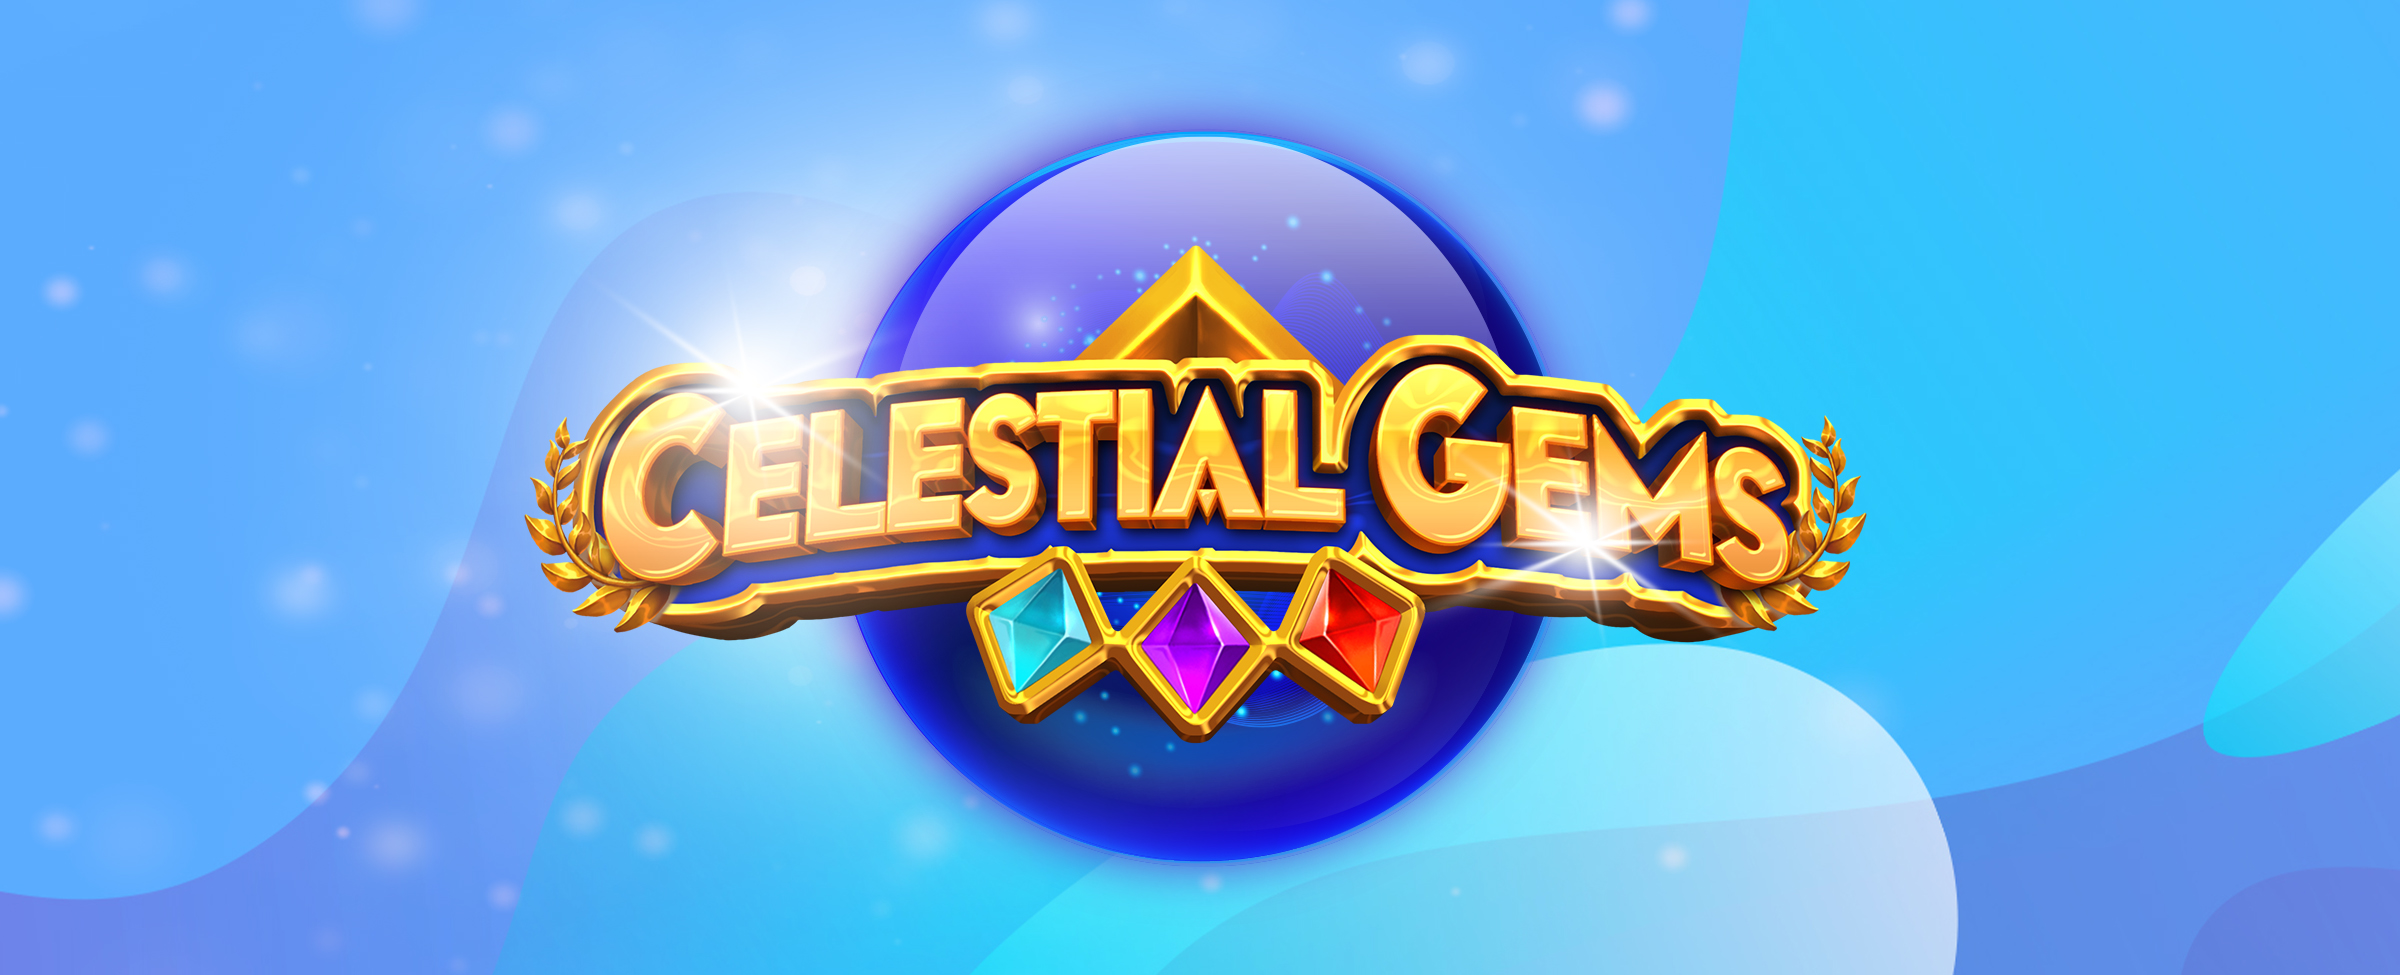 Seen in the middle of the blue-background image is the main game logo from the SlotsLV slots game, Celestial Gems, featuring a blue circular precious stone, overlaid with gold letters of the same name in shiny capitals, accompanied by three gems in teal, purple and red, encased in gold in the shape of diamonds.